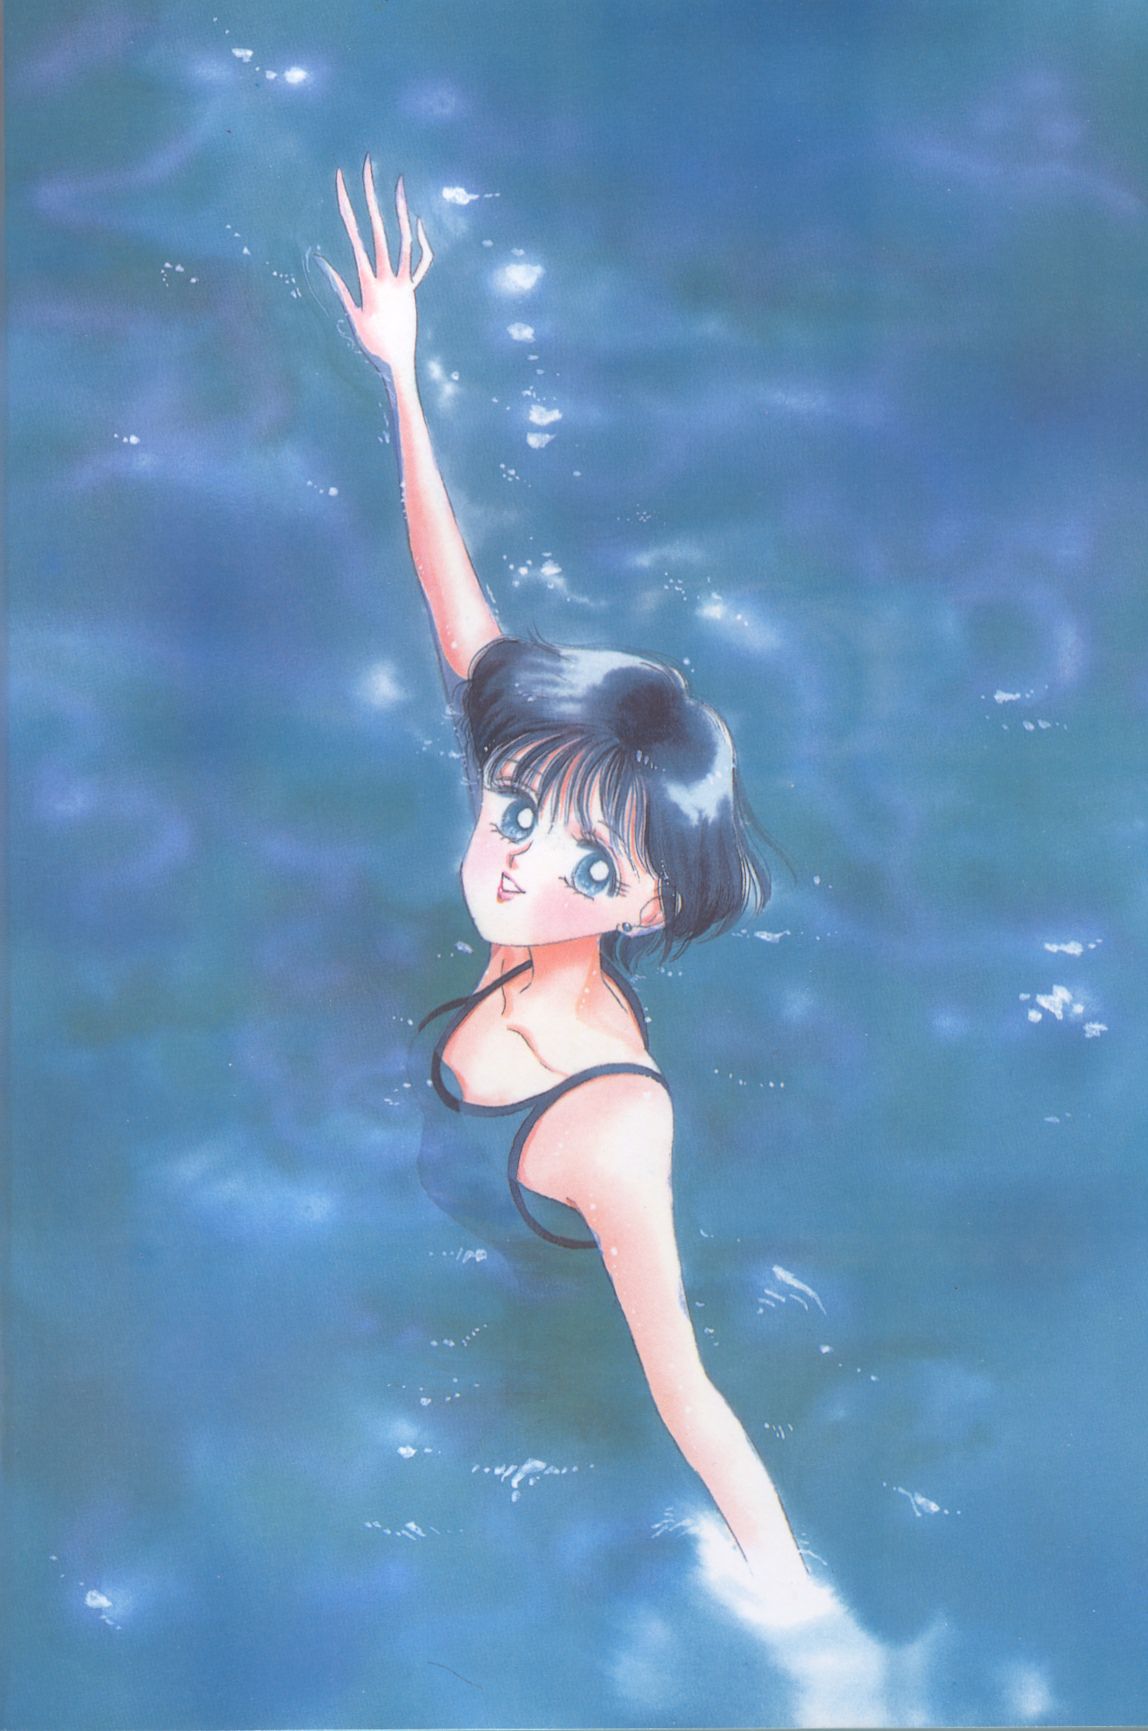 Girls Swiming and Floating in The Water 32